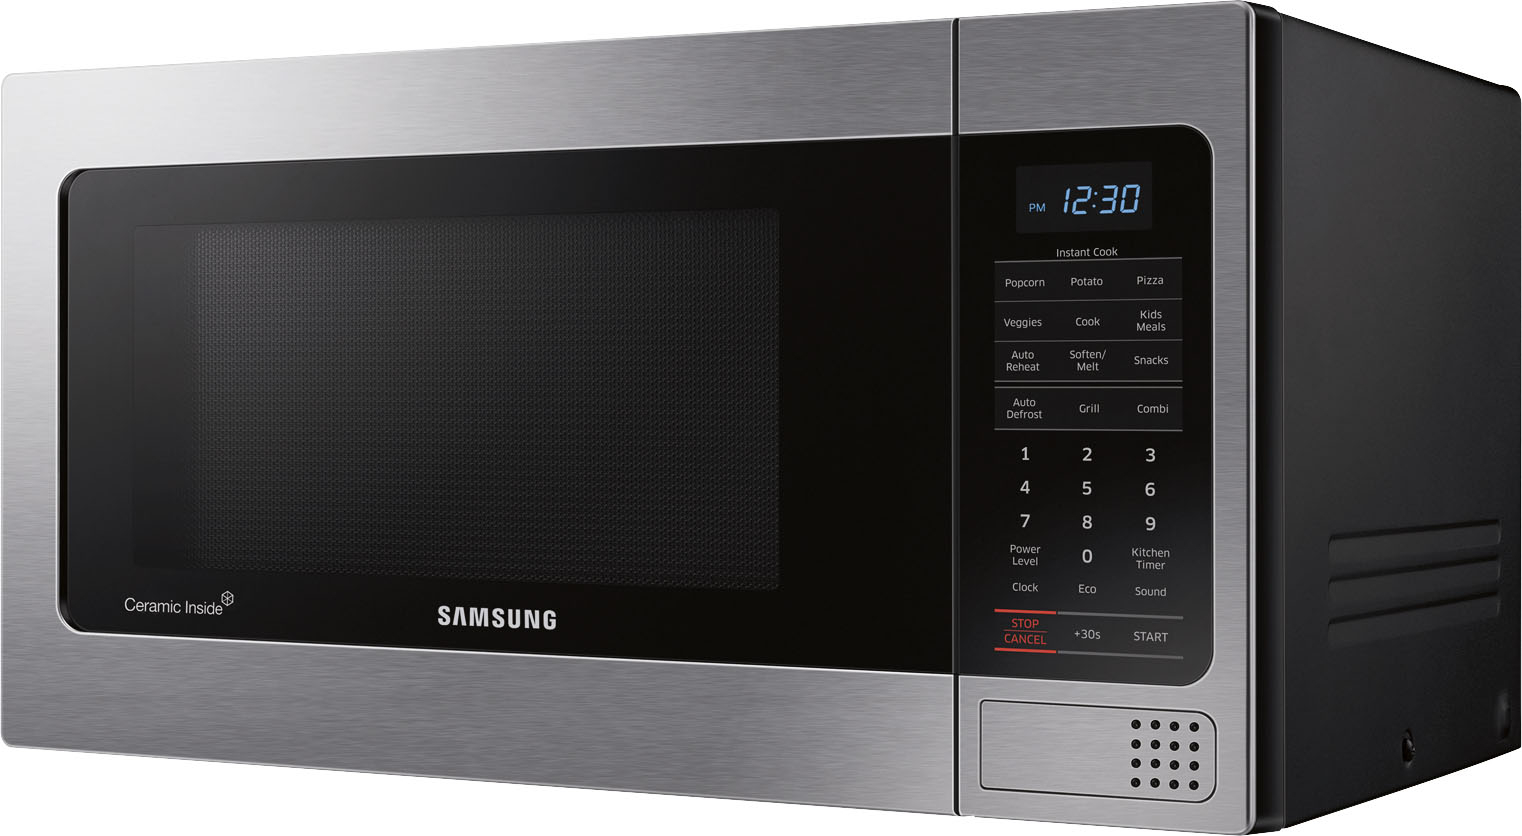 Samsung 1.1 Cu. Ft. Countertop Microwave with Grilling Element